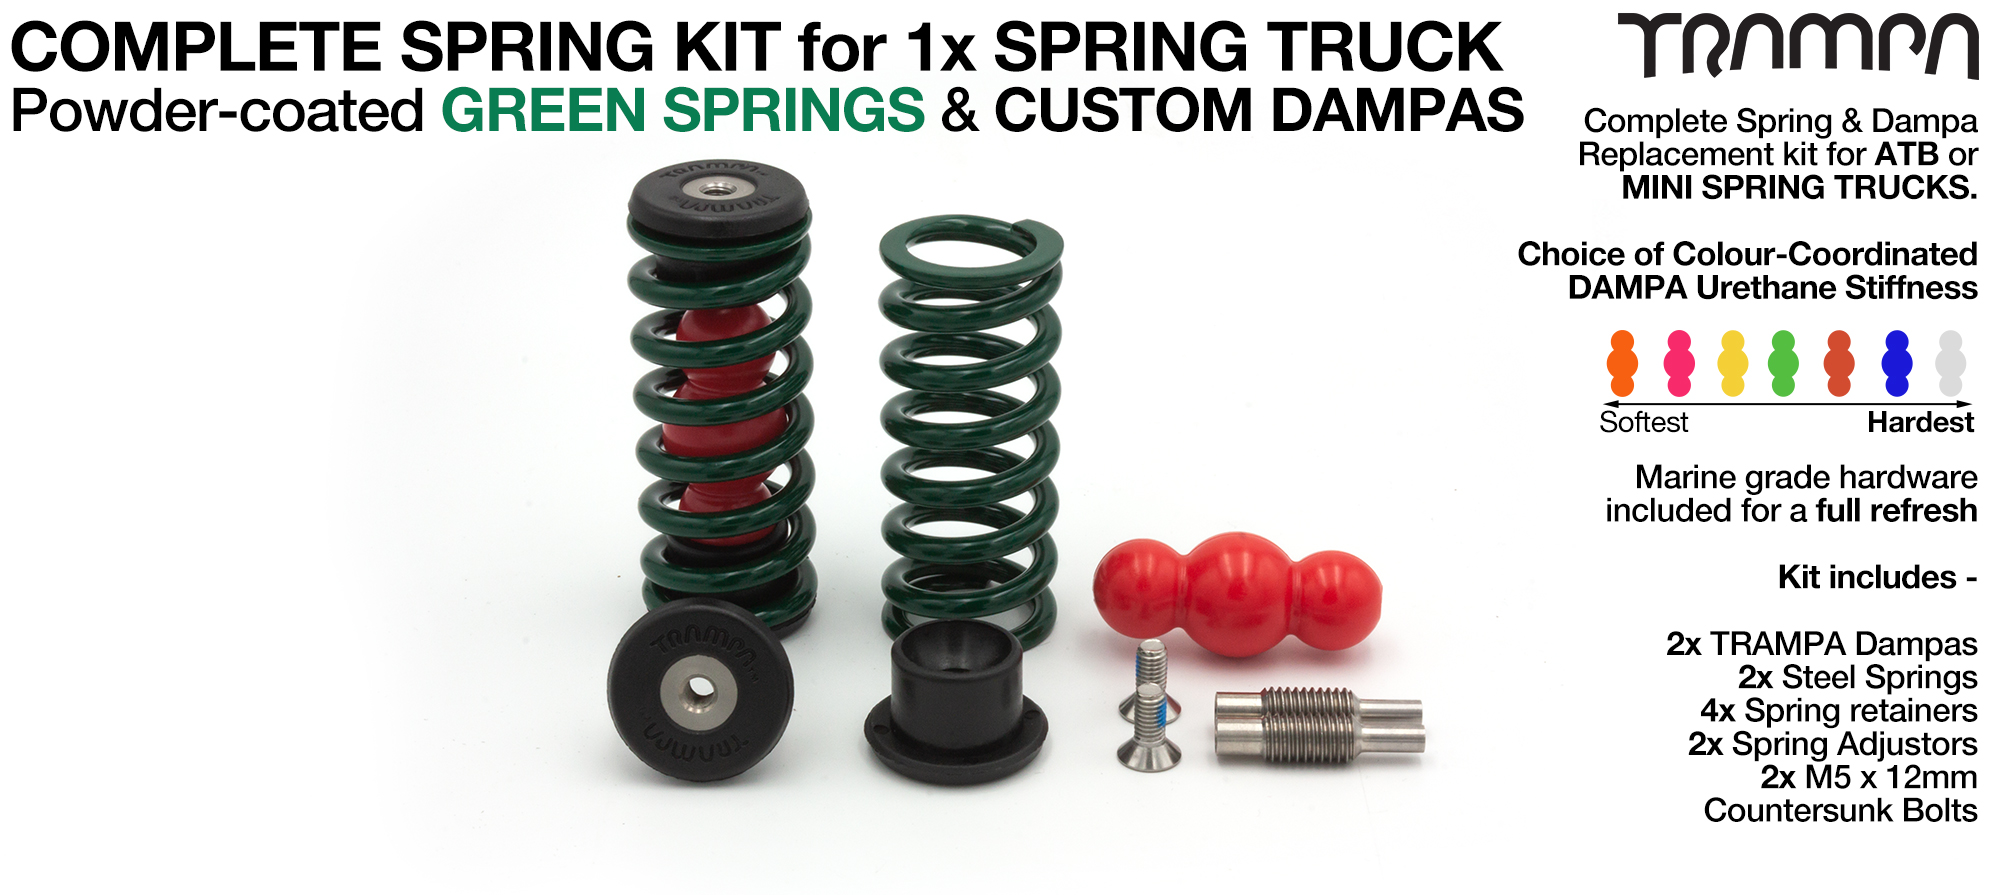 Spring kit Complete for 1x Truck - 2x Spring 2x Dampa 4x Spring Retainers 2x Spring Adjuster & 2 M5x12mm Countersunk Bolt  GREEN Springs 